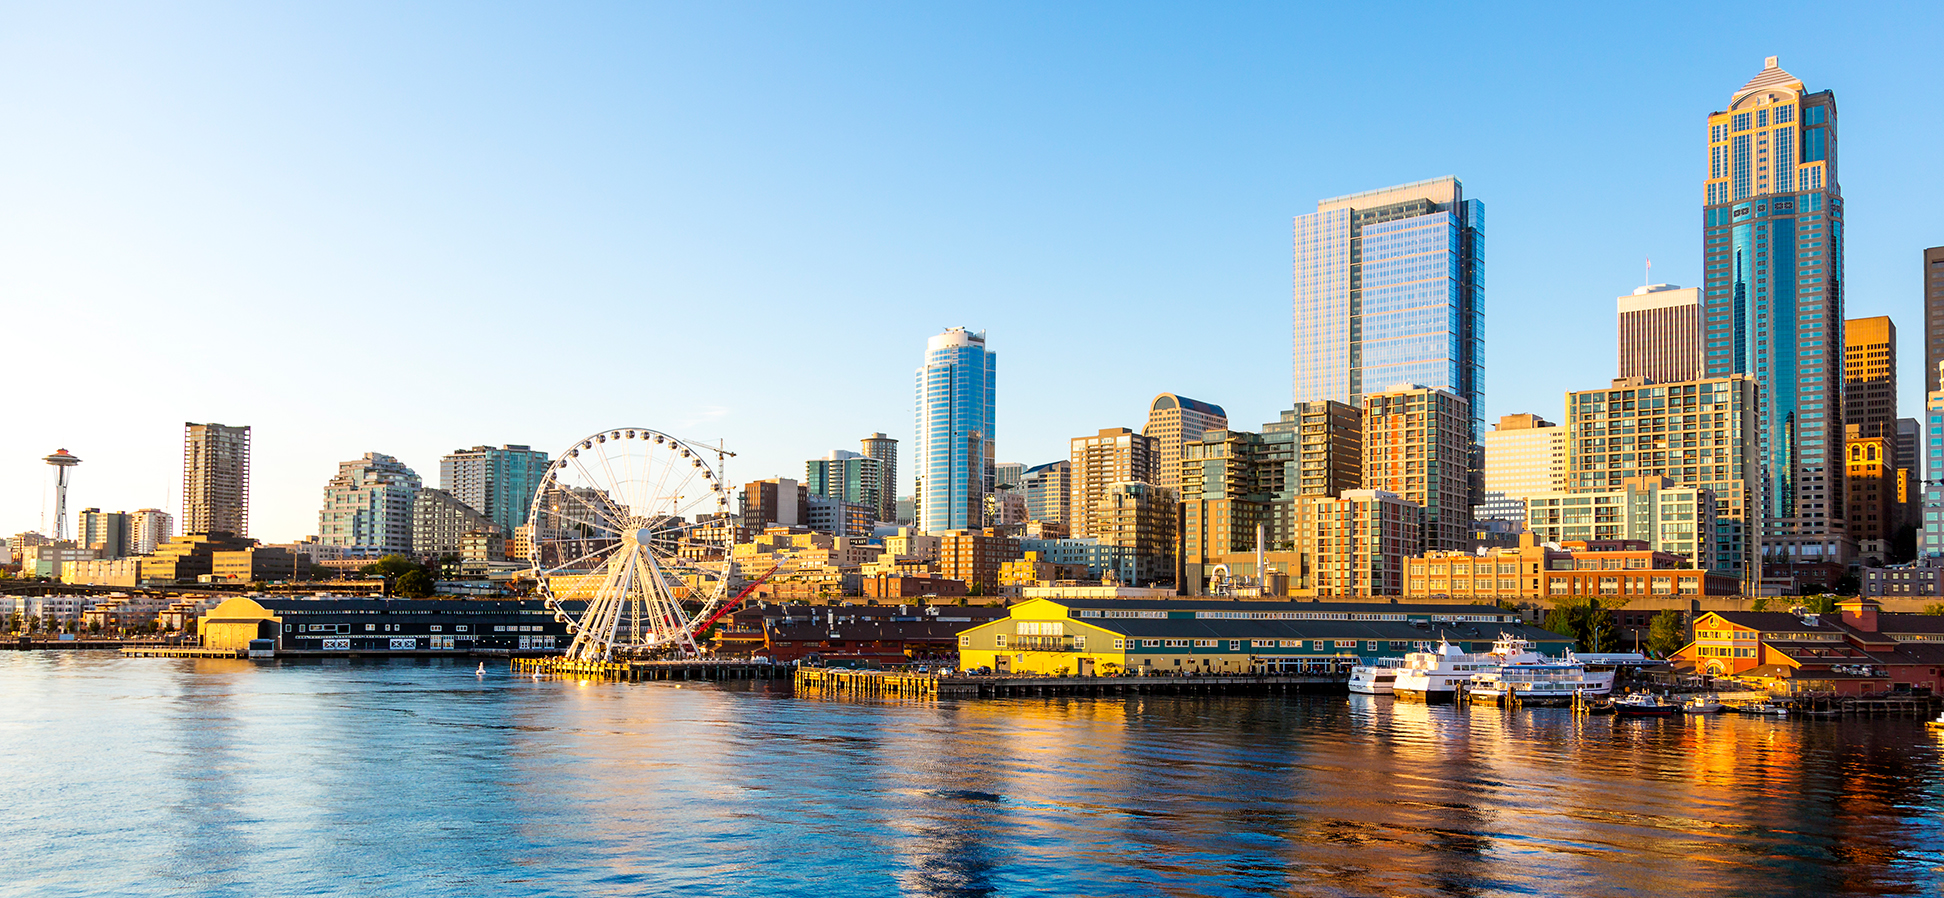 SpotHero Summer Picks: Our Top 9 Things to do in Seattle This Summer